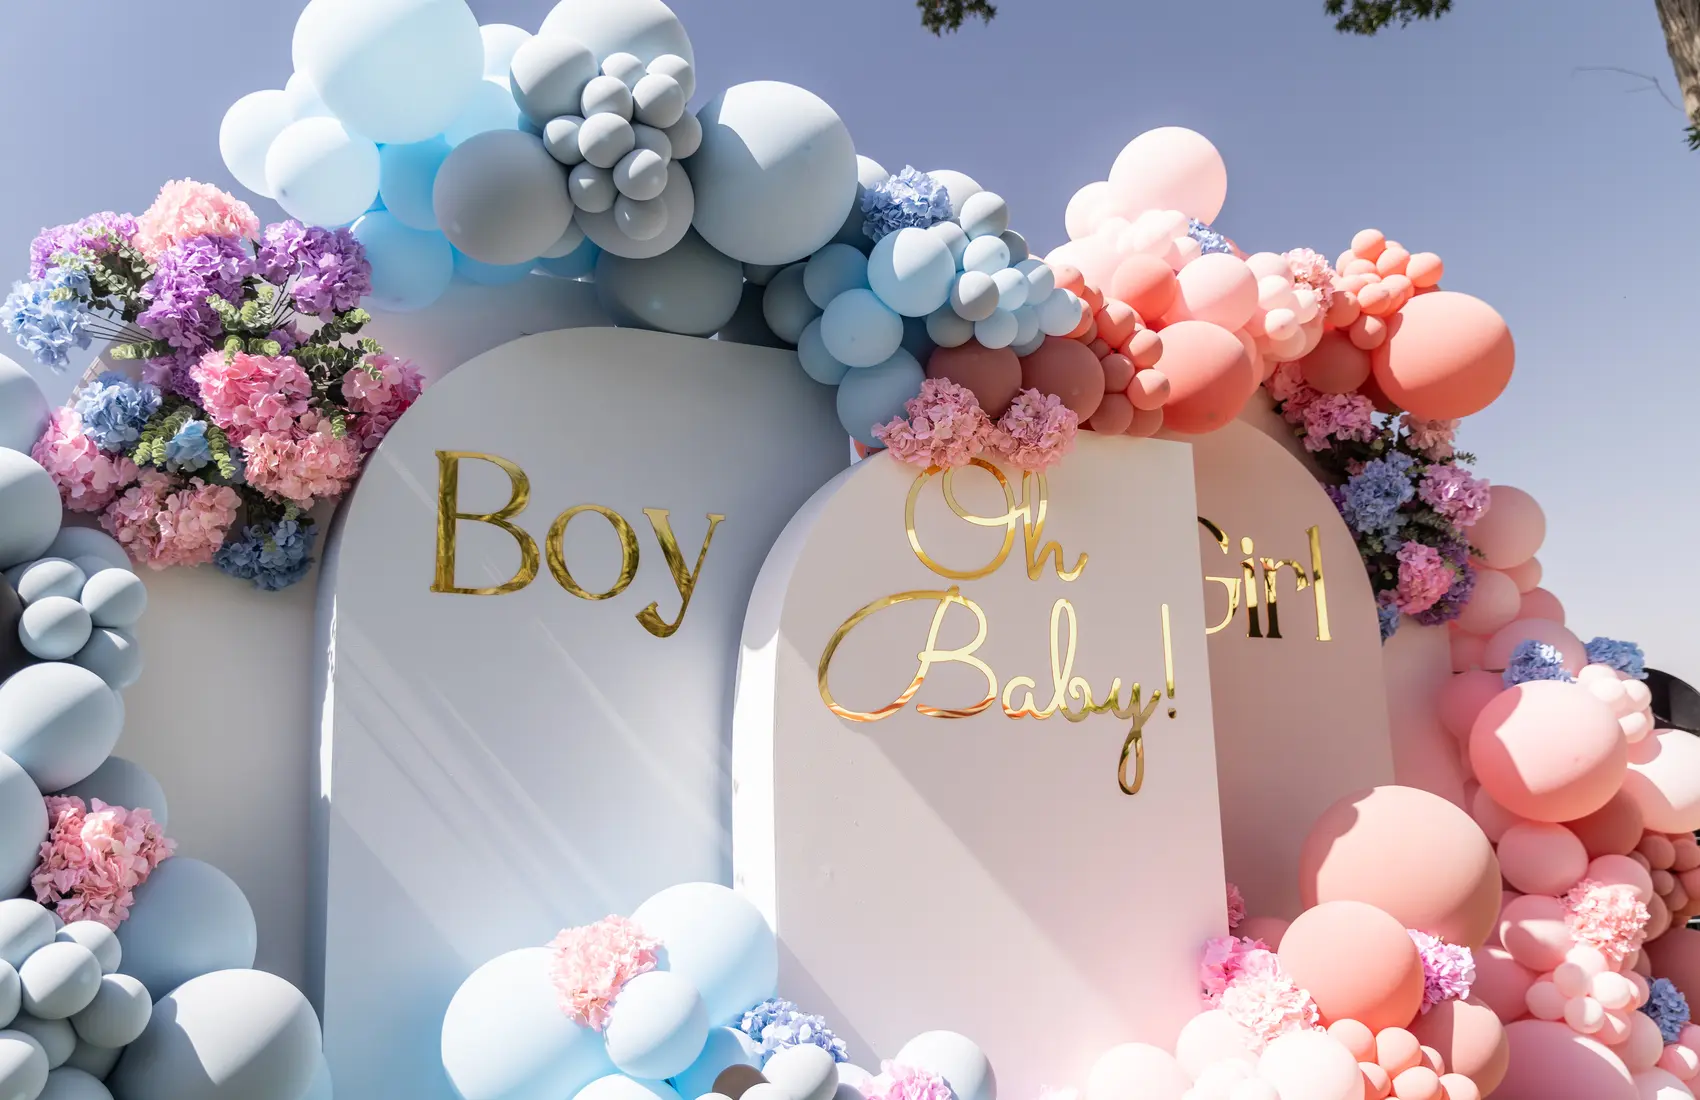 He or She? – A Grand Gender Reveal Photos